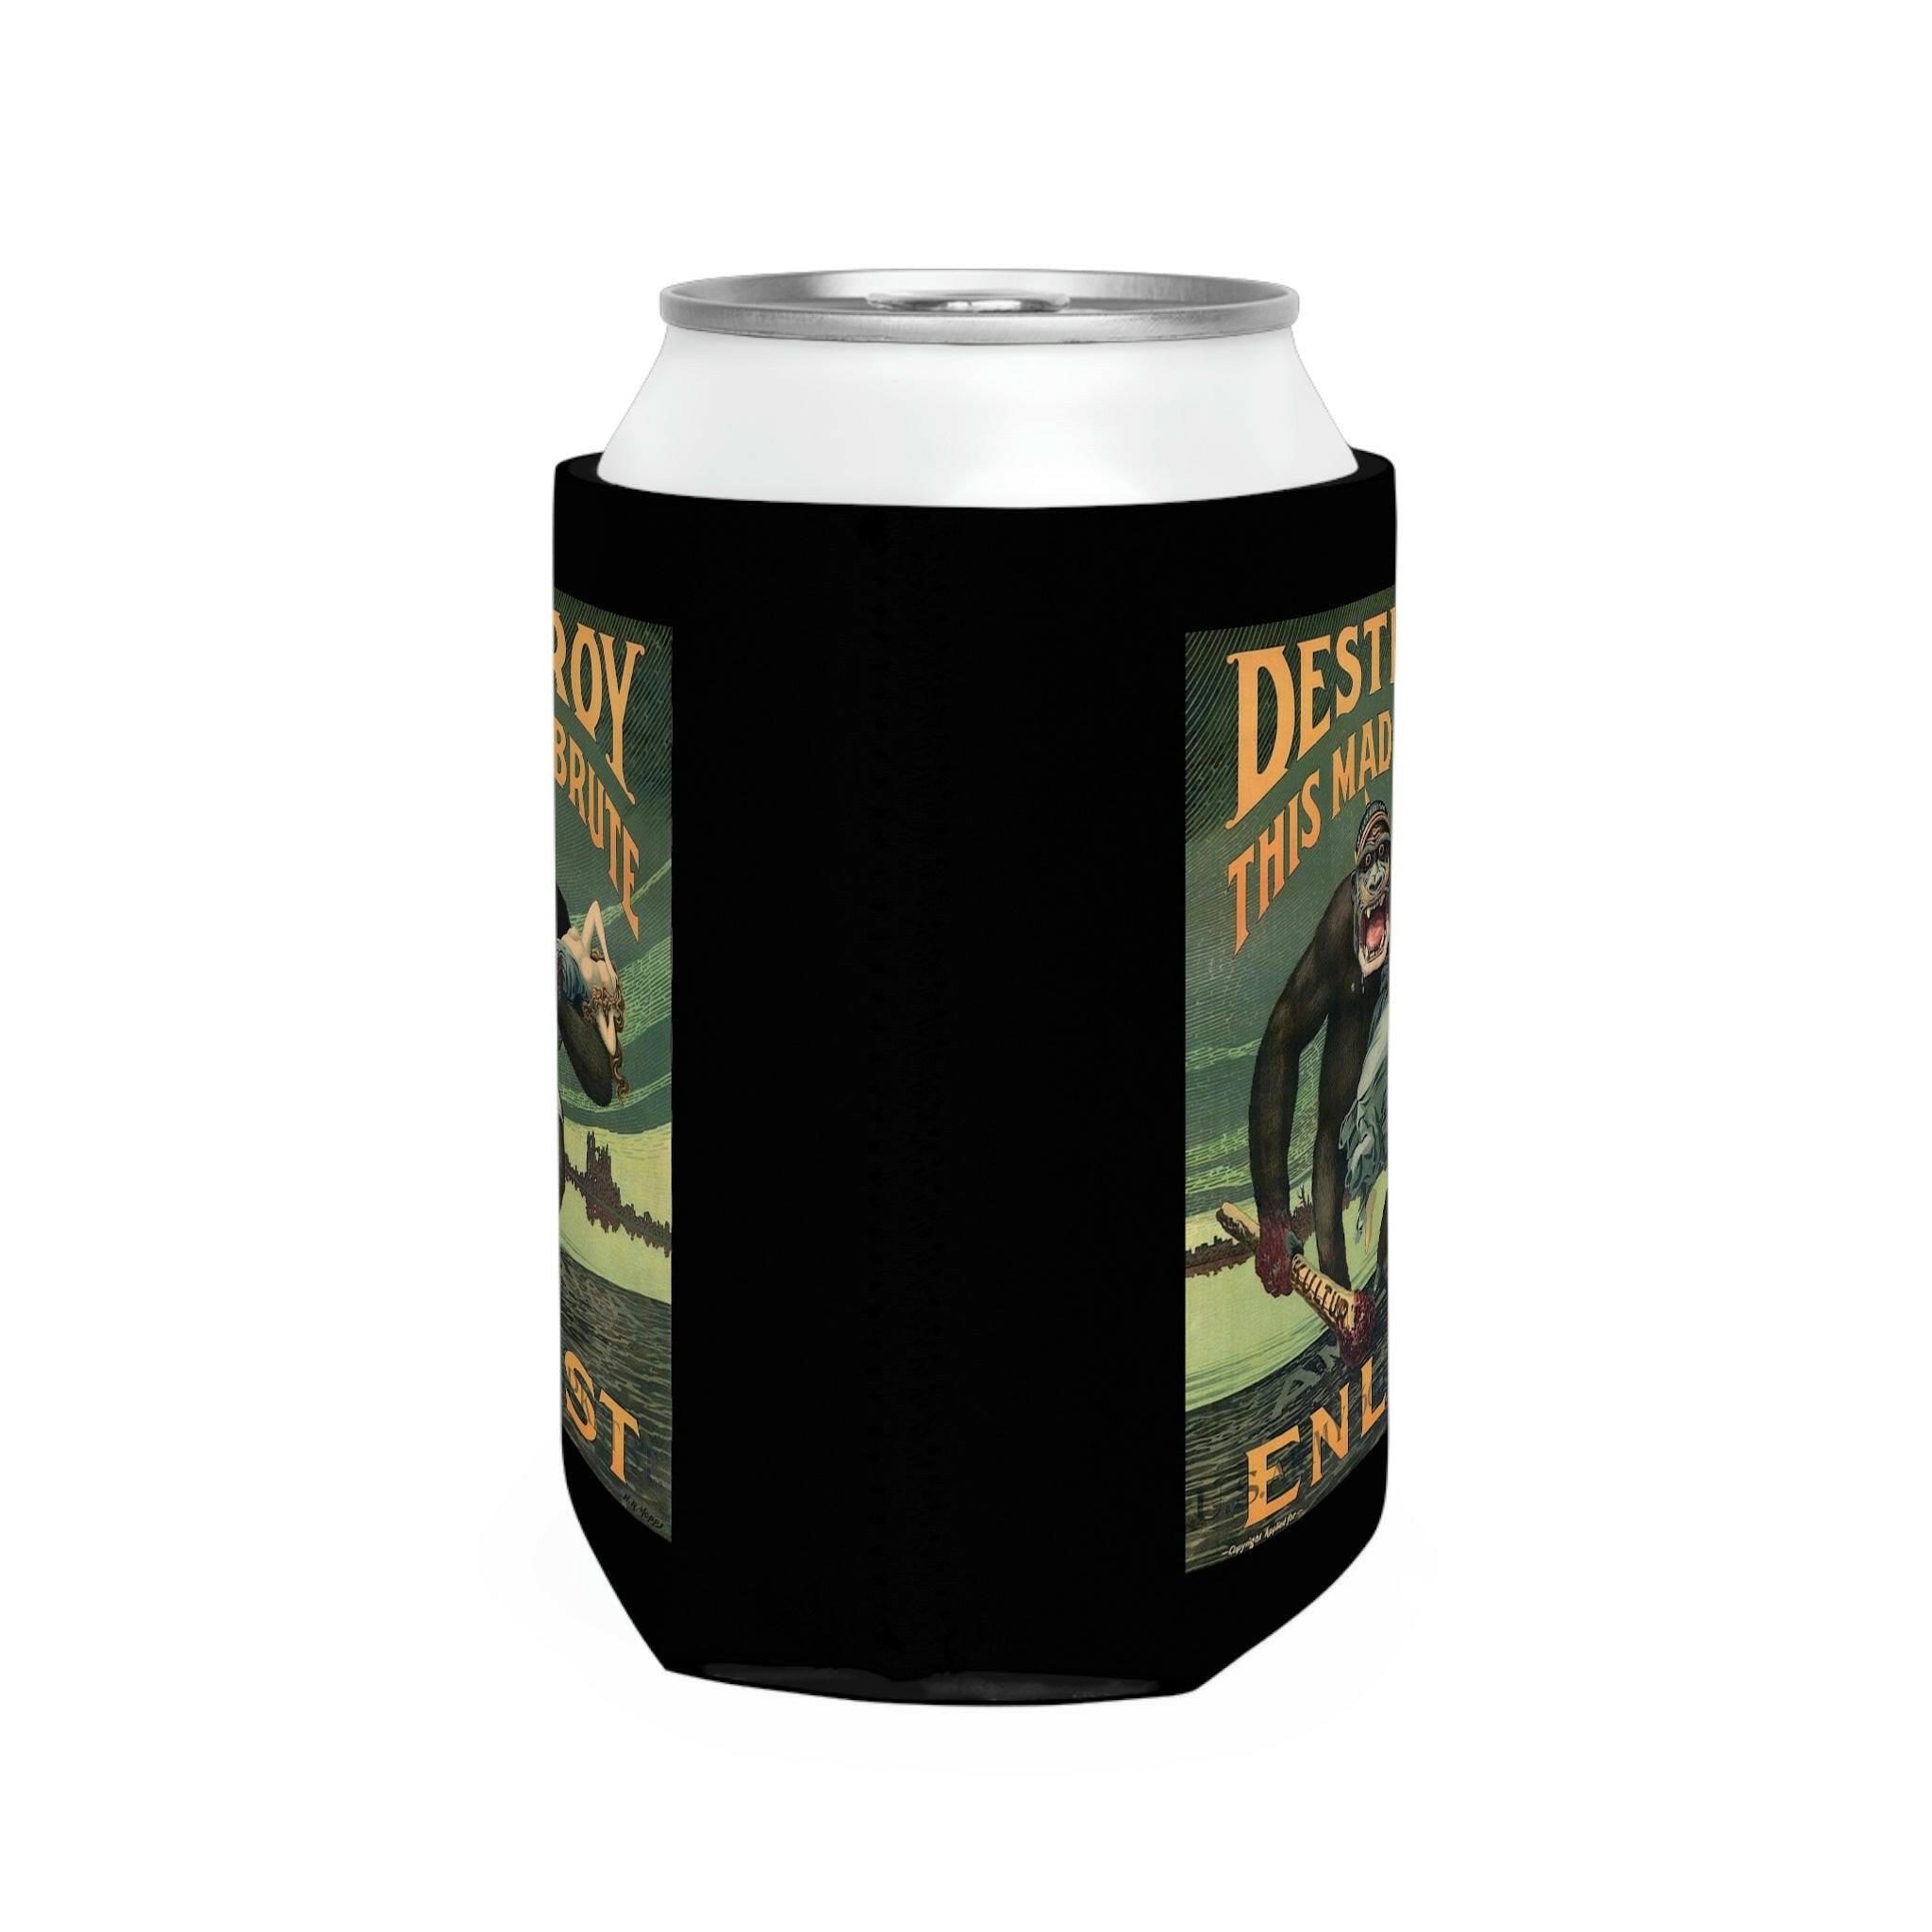 “Destroy this Mad Brute” -Can Cooler Sleeve.